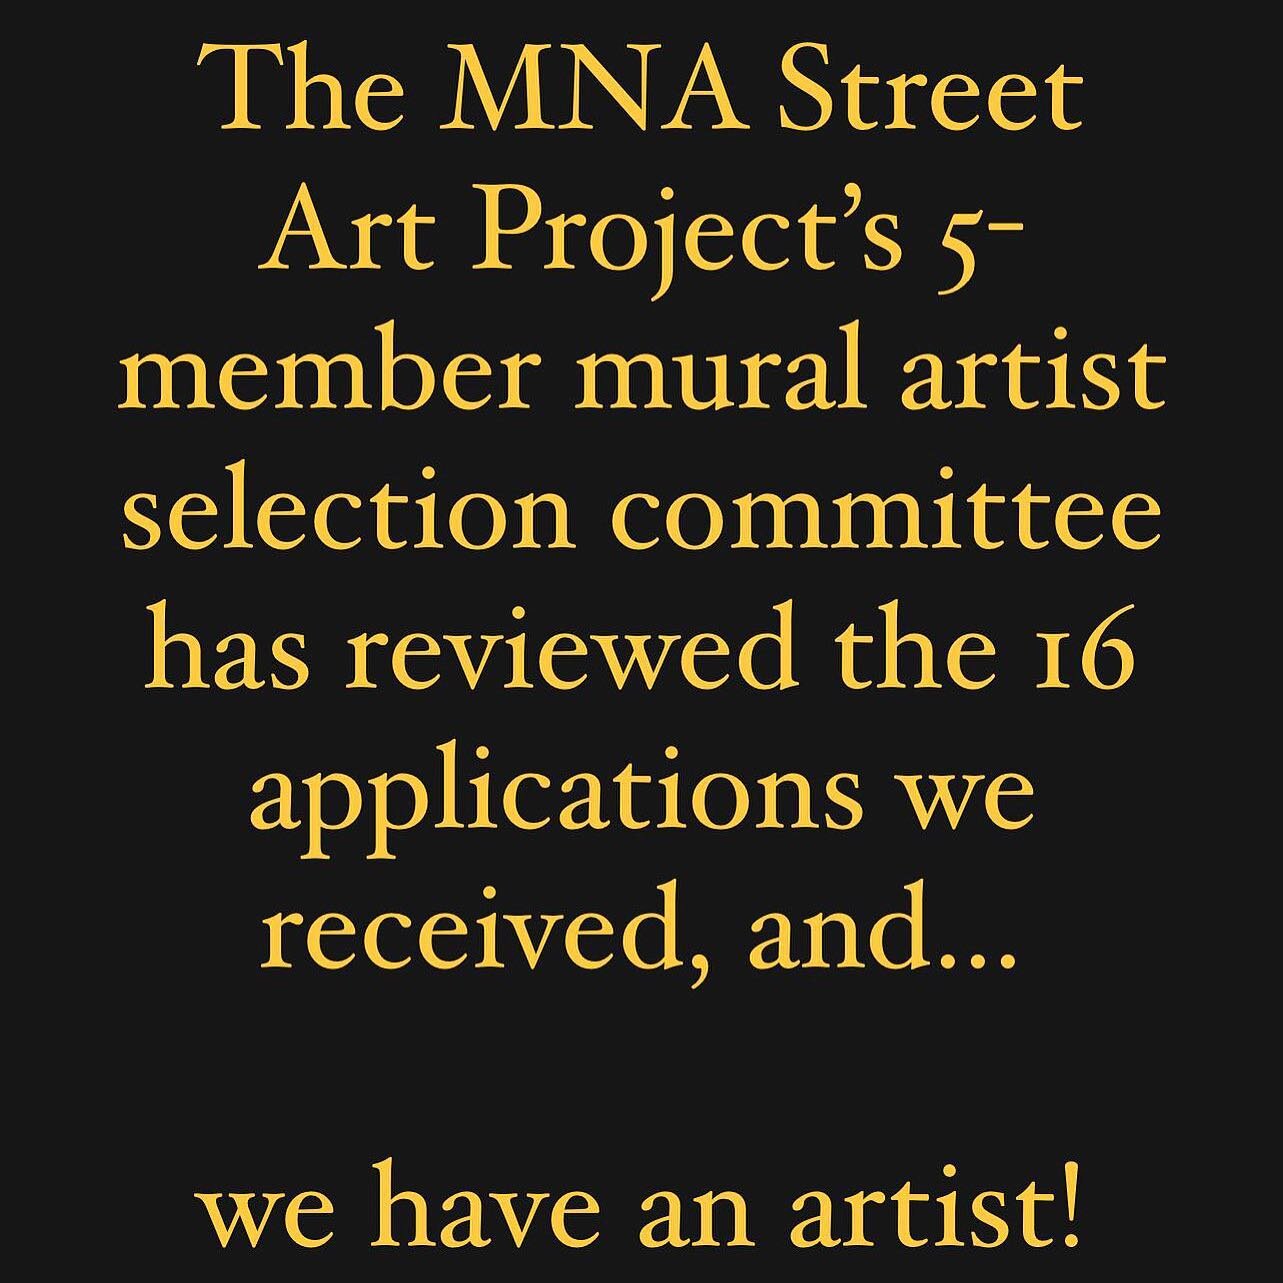 Yay! We&rsquo;re really excited. This artist is designing a street intersection mural to be painted by the community June 17 at sw 36th Ave &amp; canby st so save the date to join us! More info coming soon!
#mnapdx #mnastreetartproject @cityrepairpro